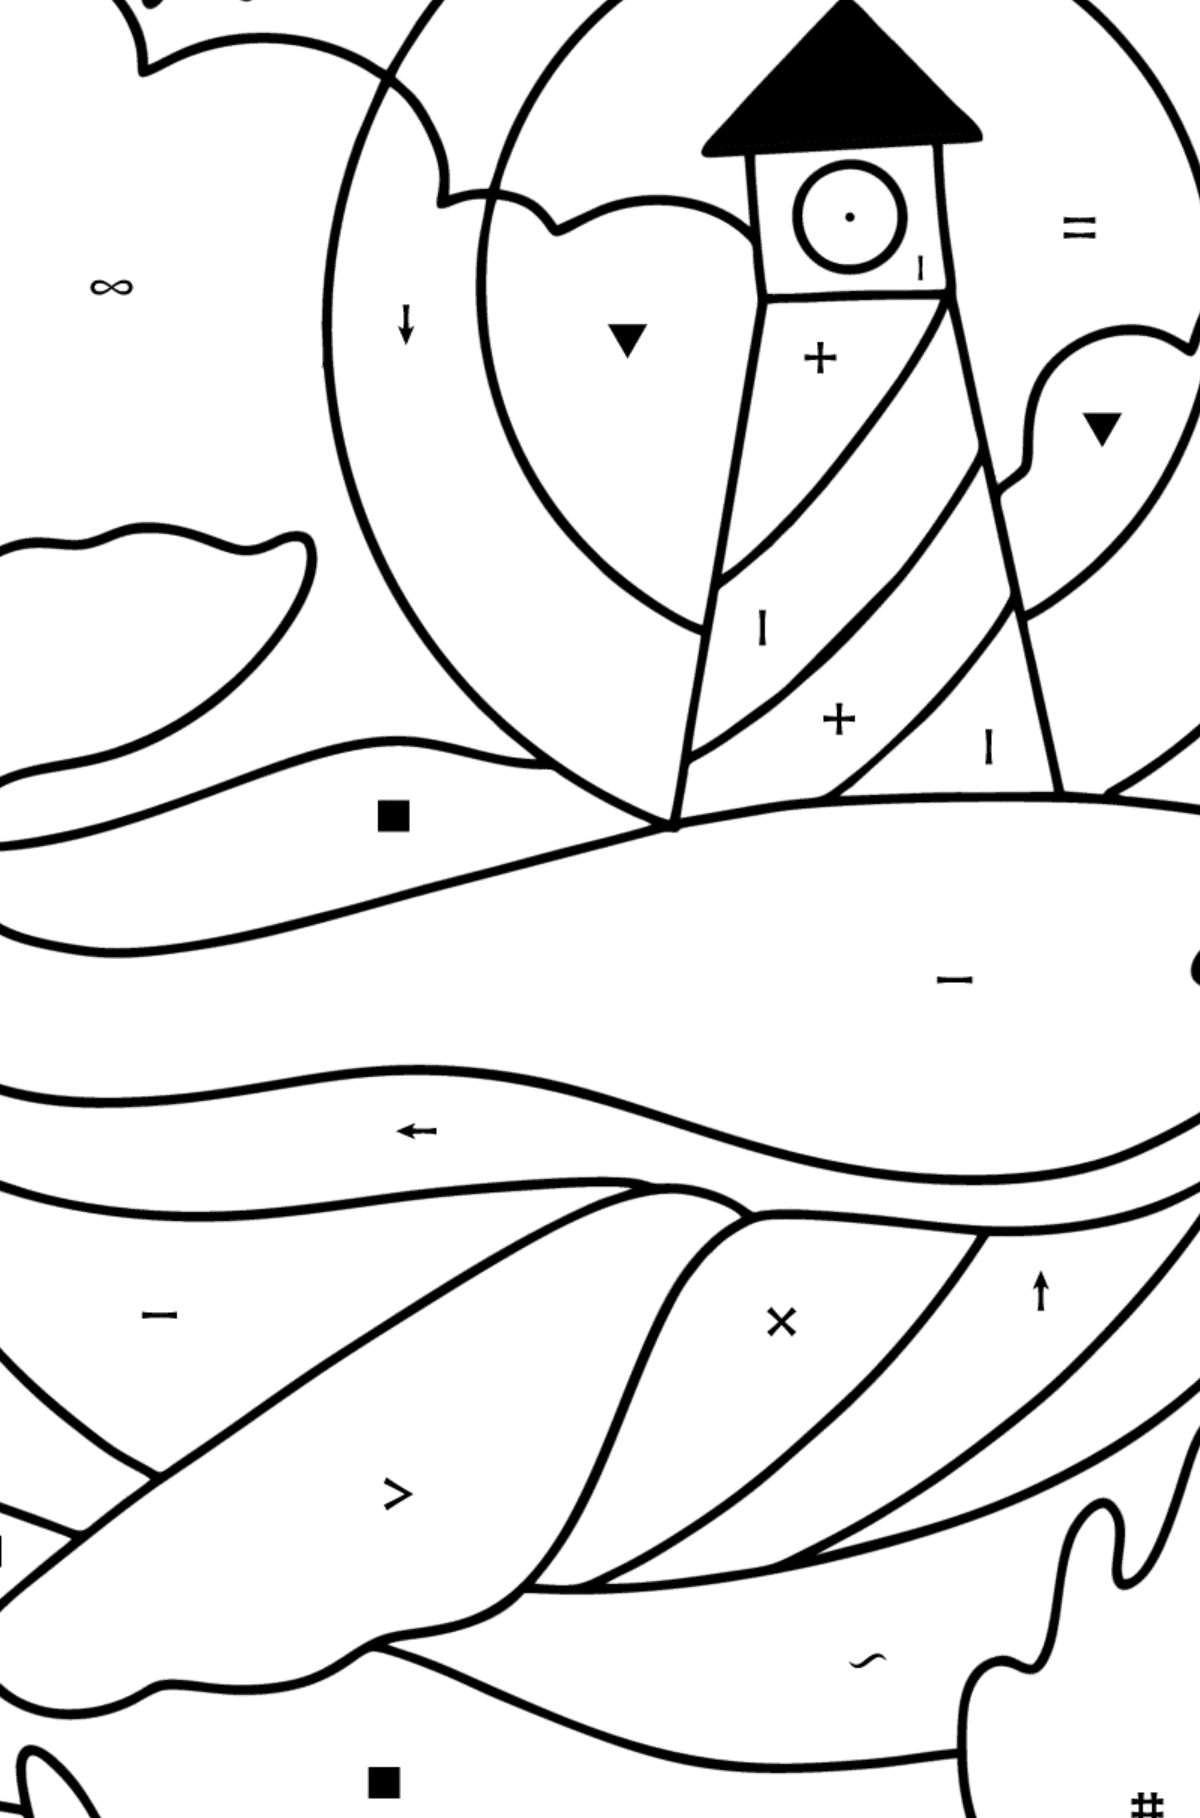 Whale with lighthouse coloring page - Coloring by Symbols for Kids